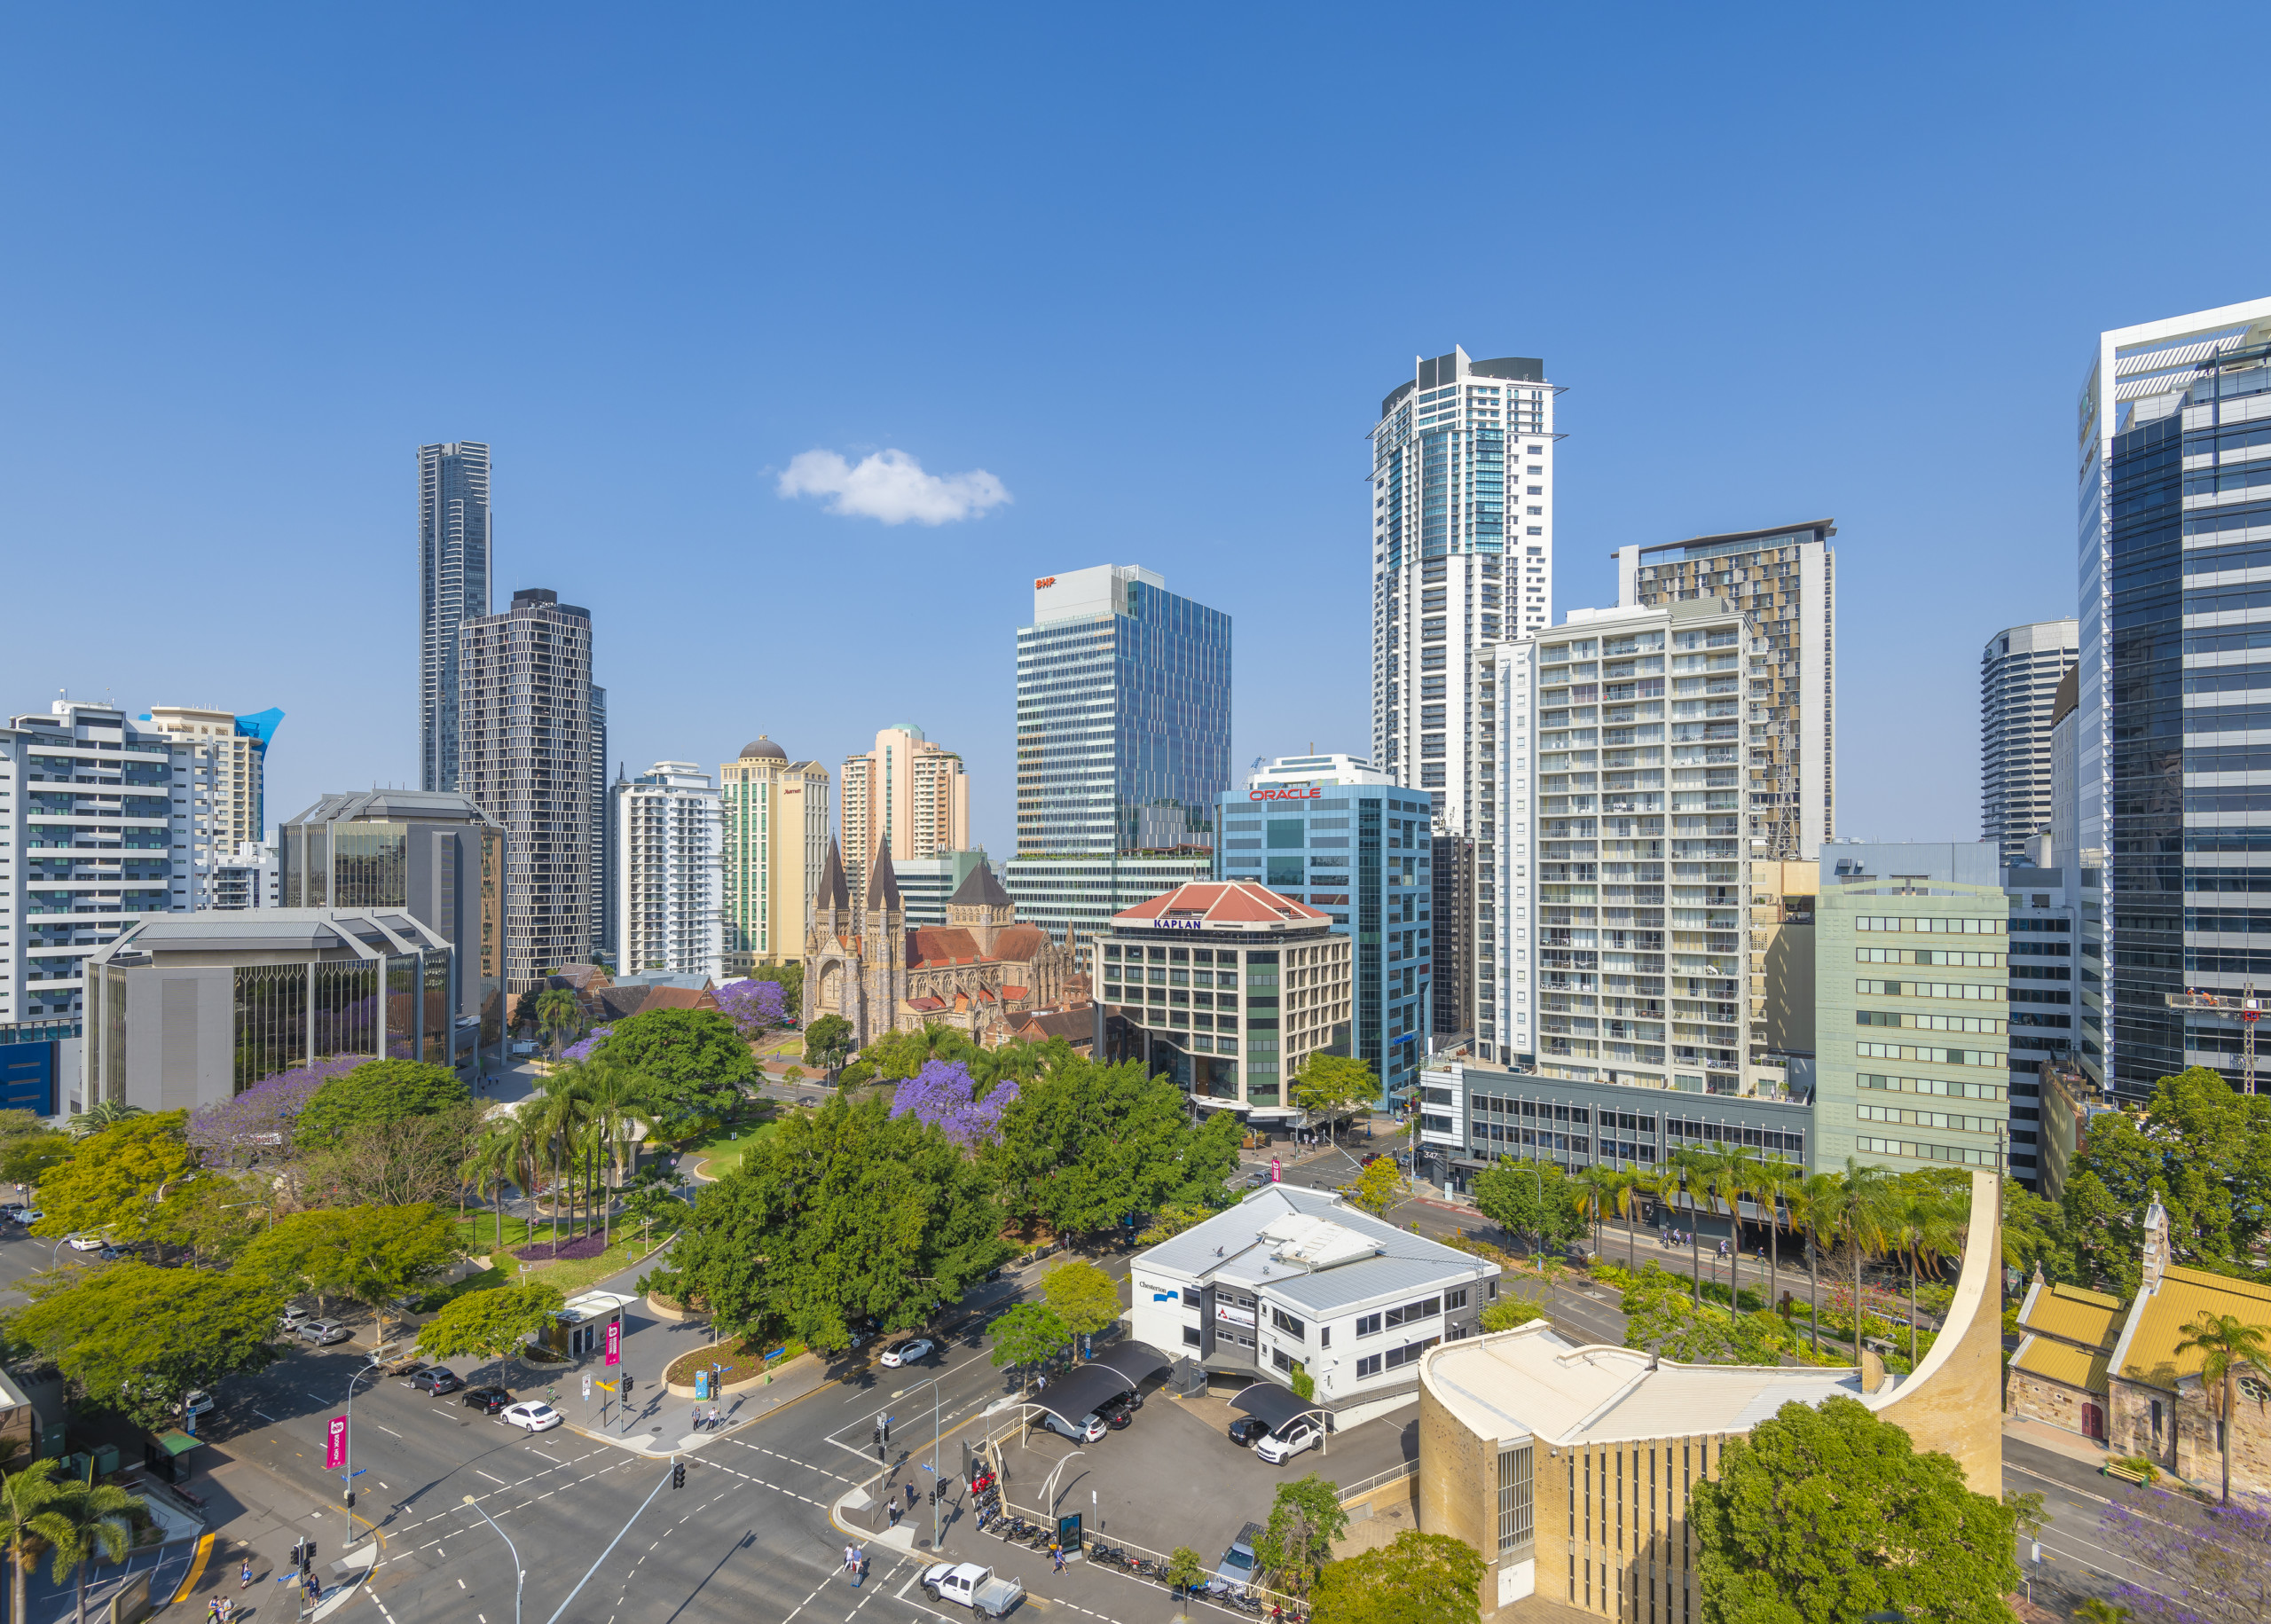 Office to Luxury Apartments Pitched for Brisbane